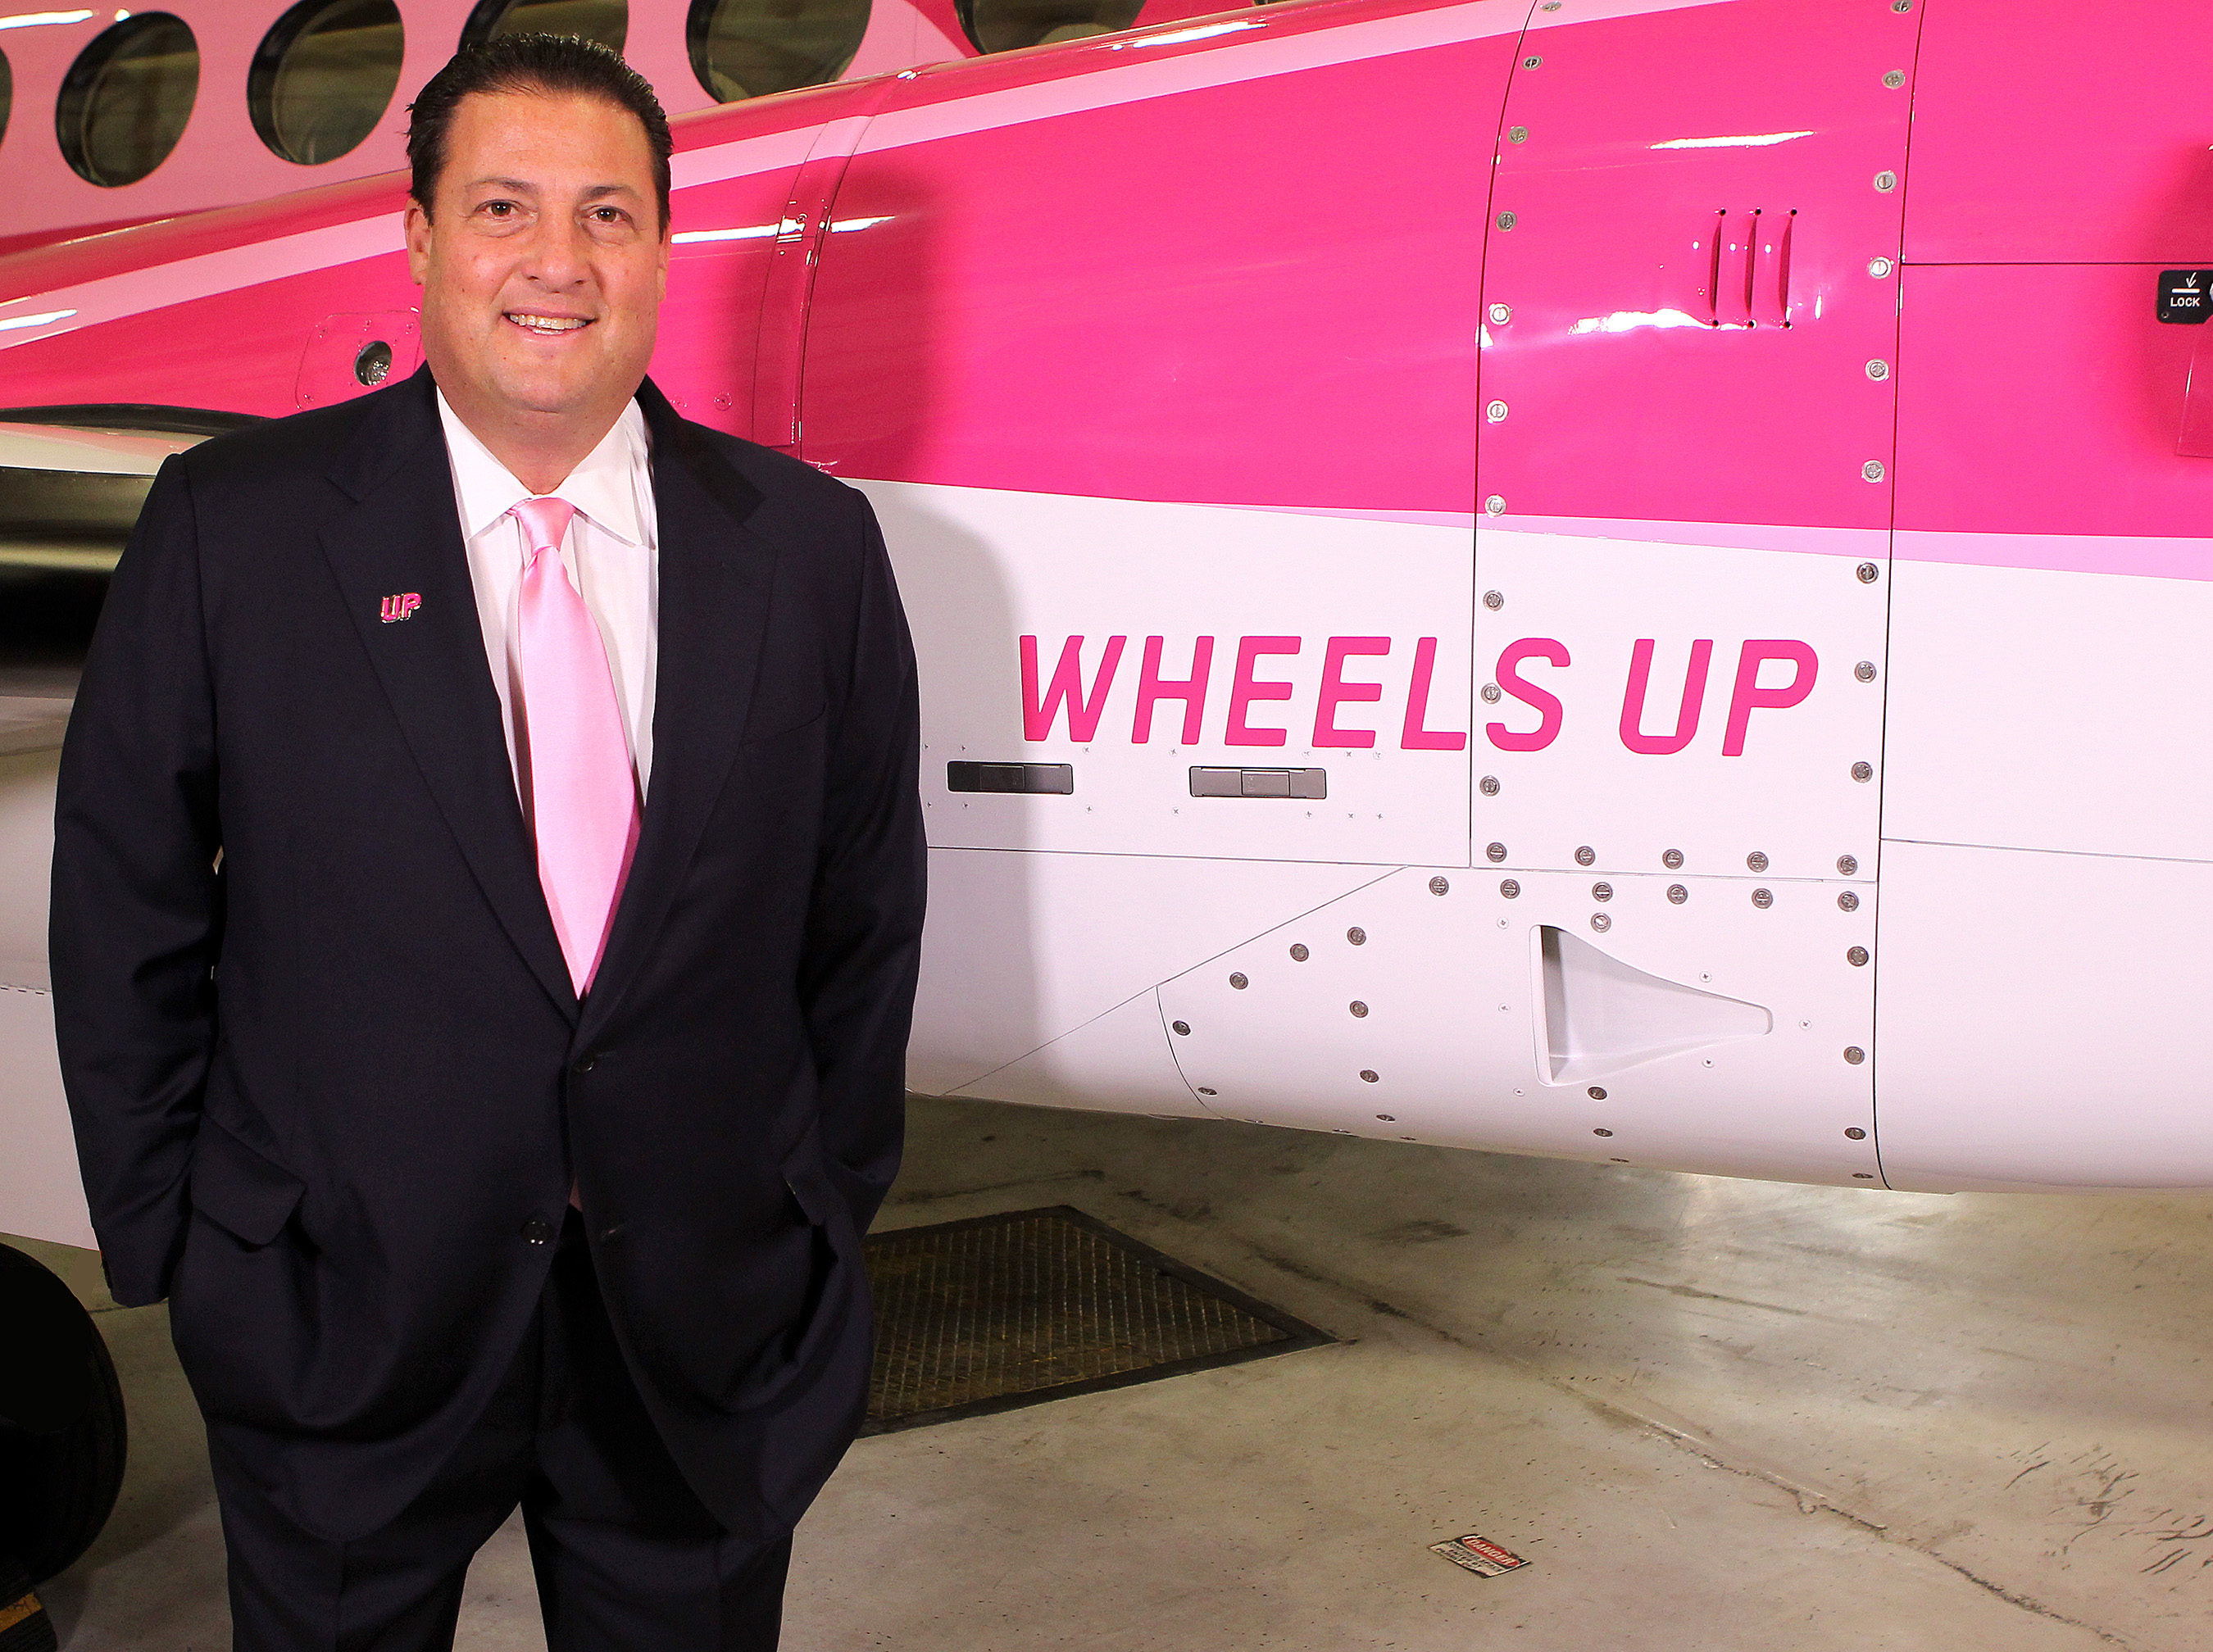 Wheels Up Officially Unveiled First Ever Pink Beechcraft King Air 350i Aircraft In Support Of Breast Cancer Awareness Month